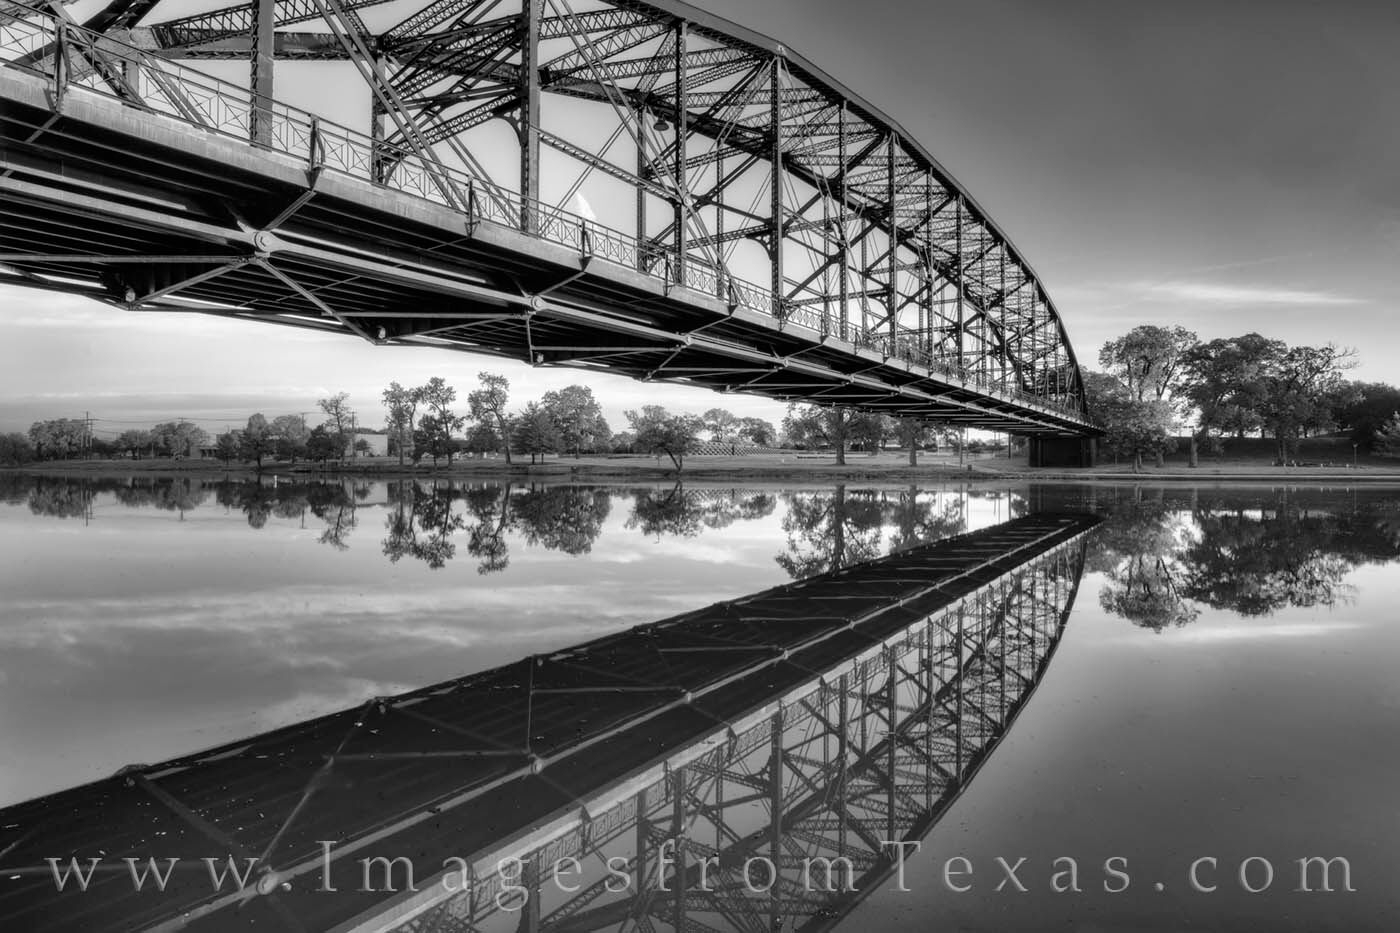 From the east end of the Waco Riverwalk, the Washington Avenue Bridge and its reflection in the Brazos River are pictured here...